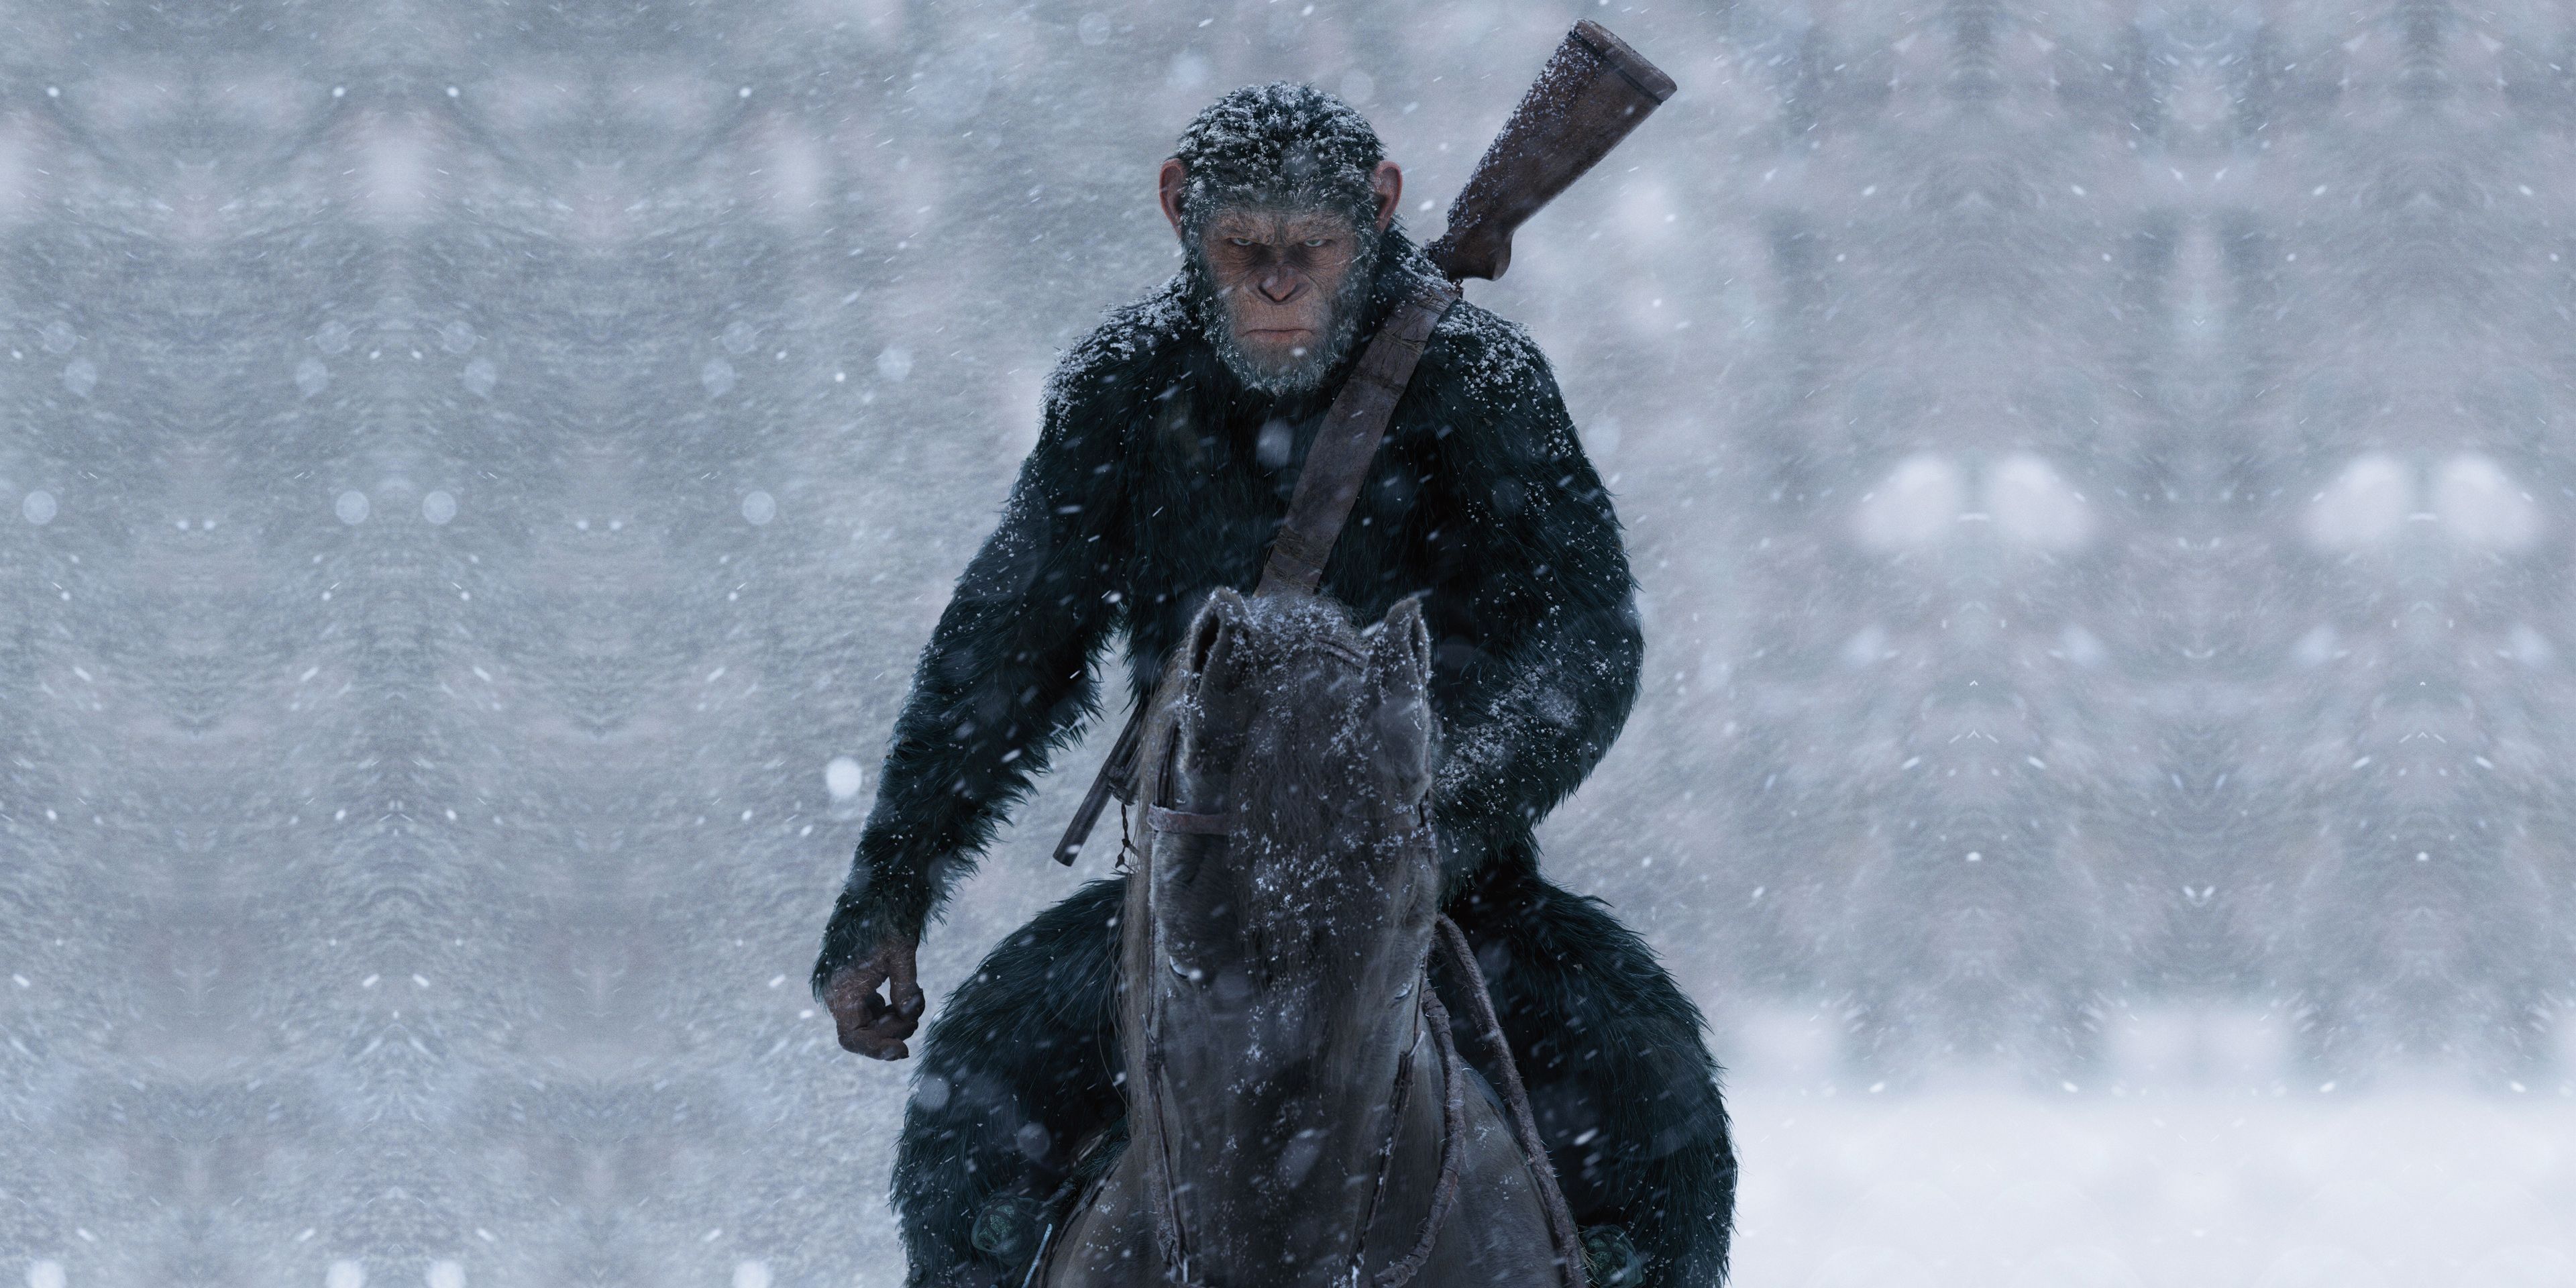 Caesar rding his horse in the snow in War for the Planet of the Apes